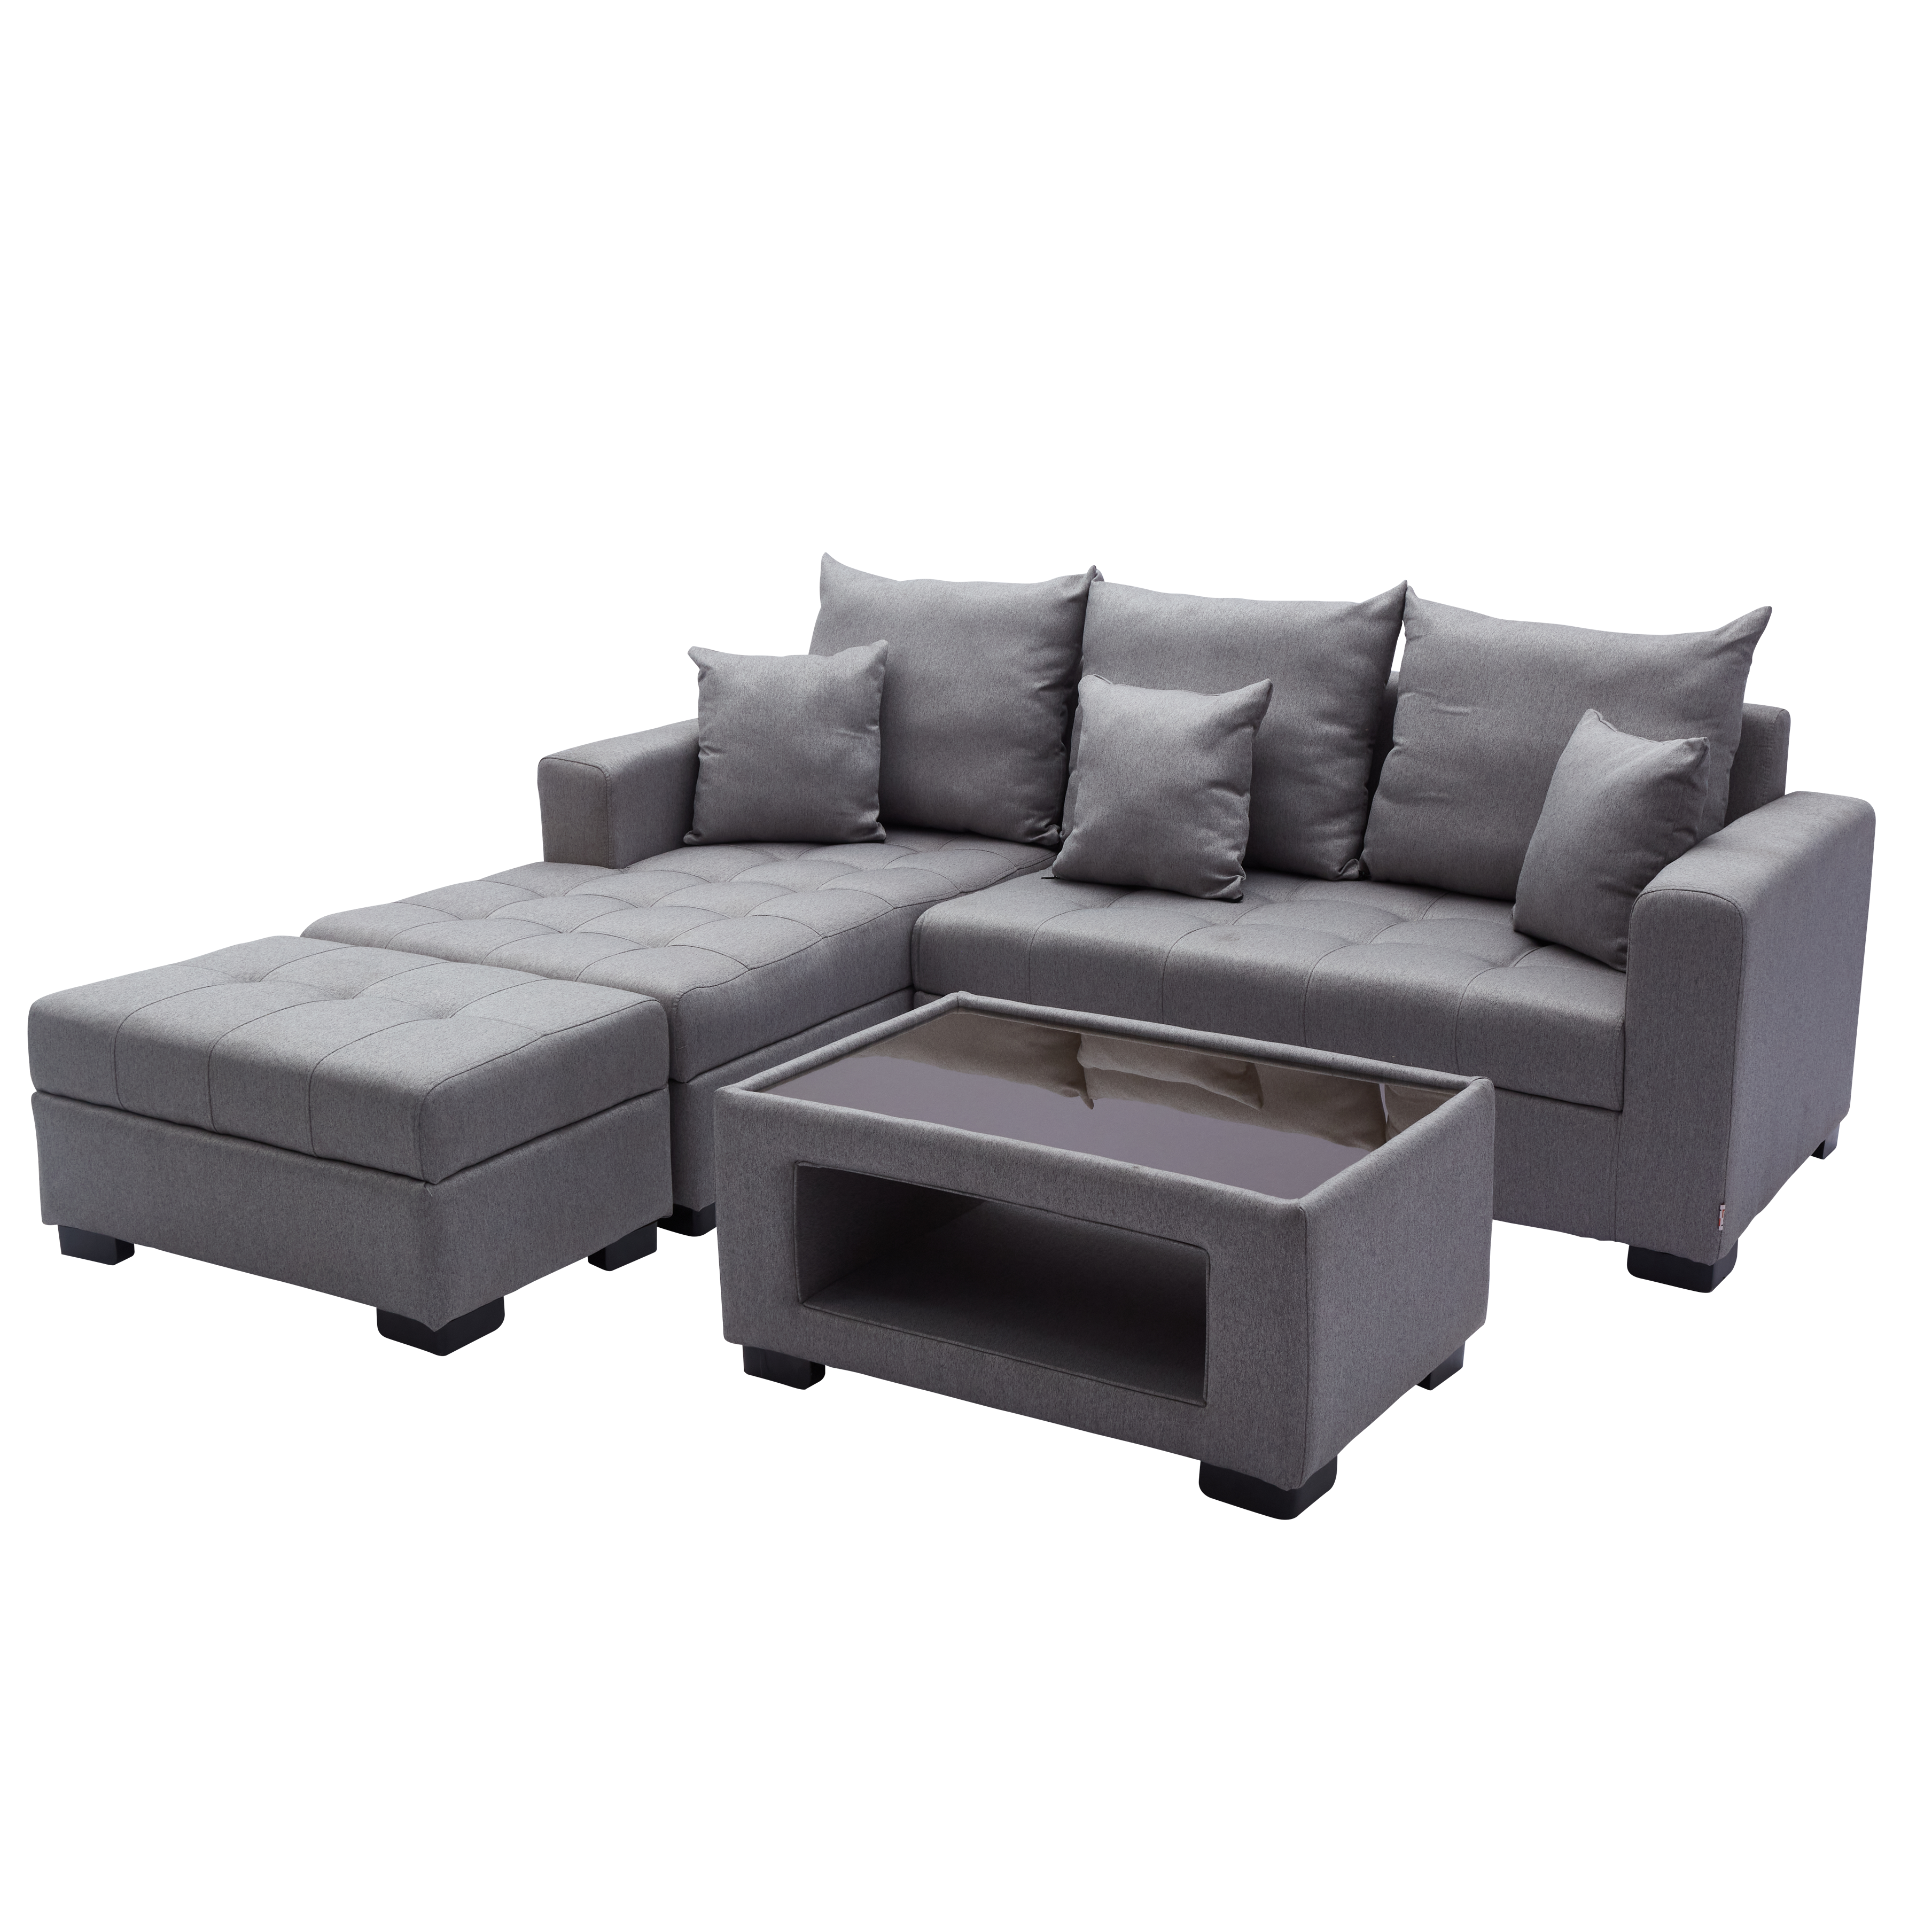 ANGELO Fabric Sofa Set with Storage Ottoman and Glass Top Table AF Home